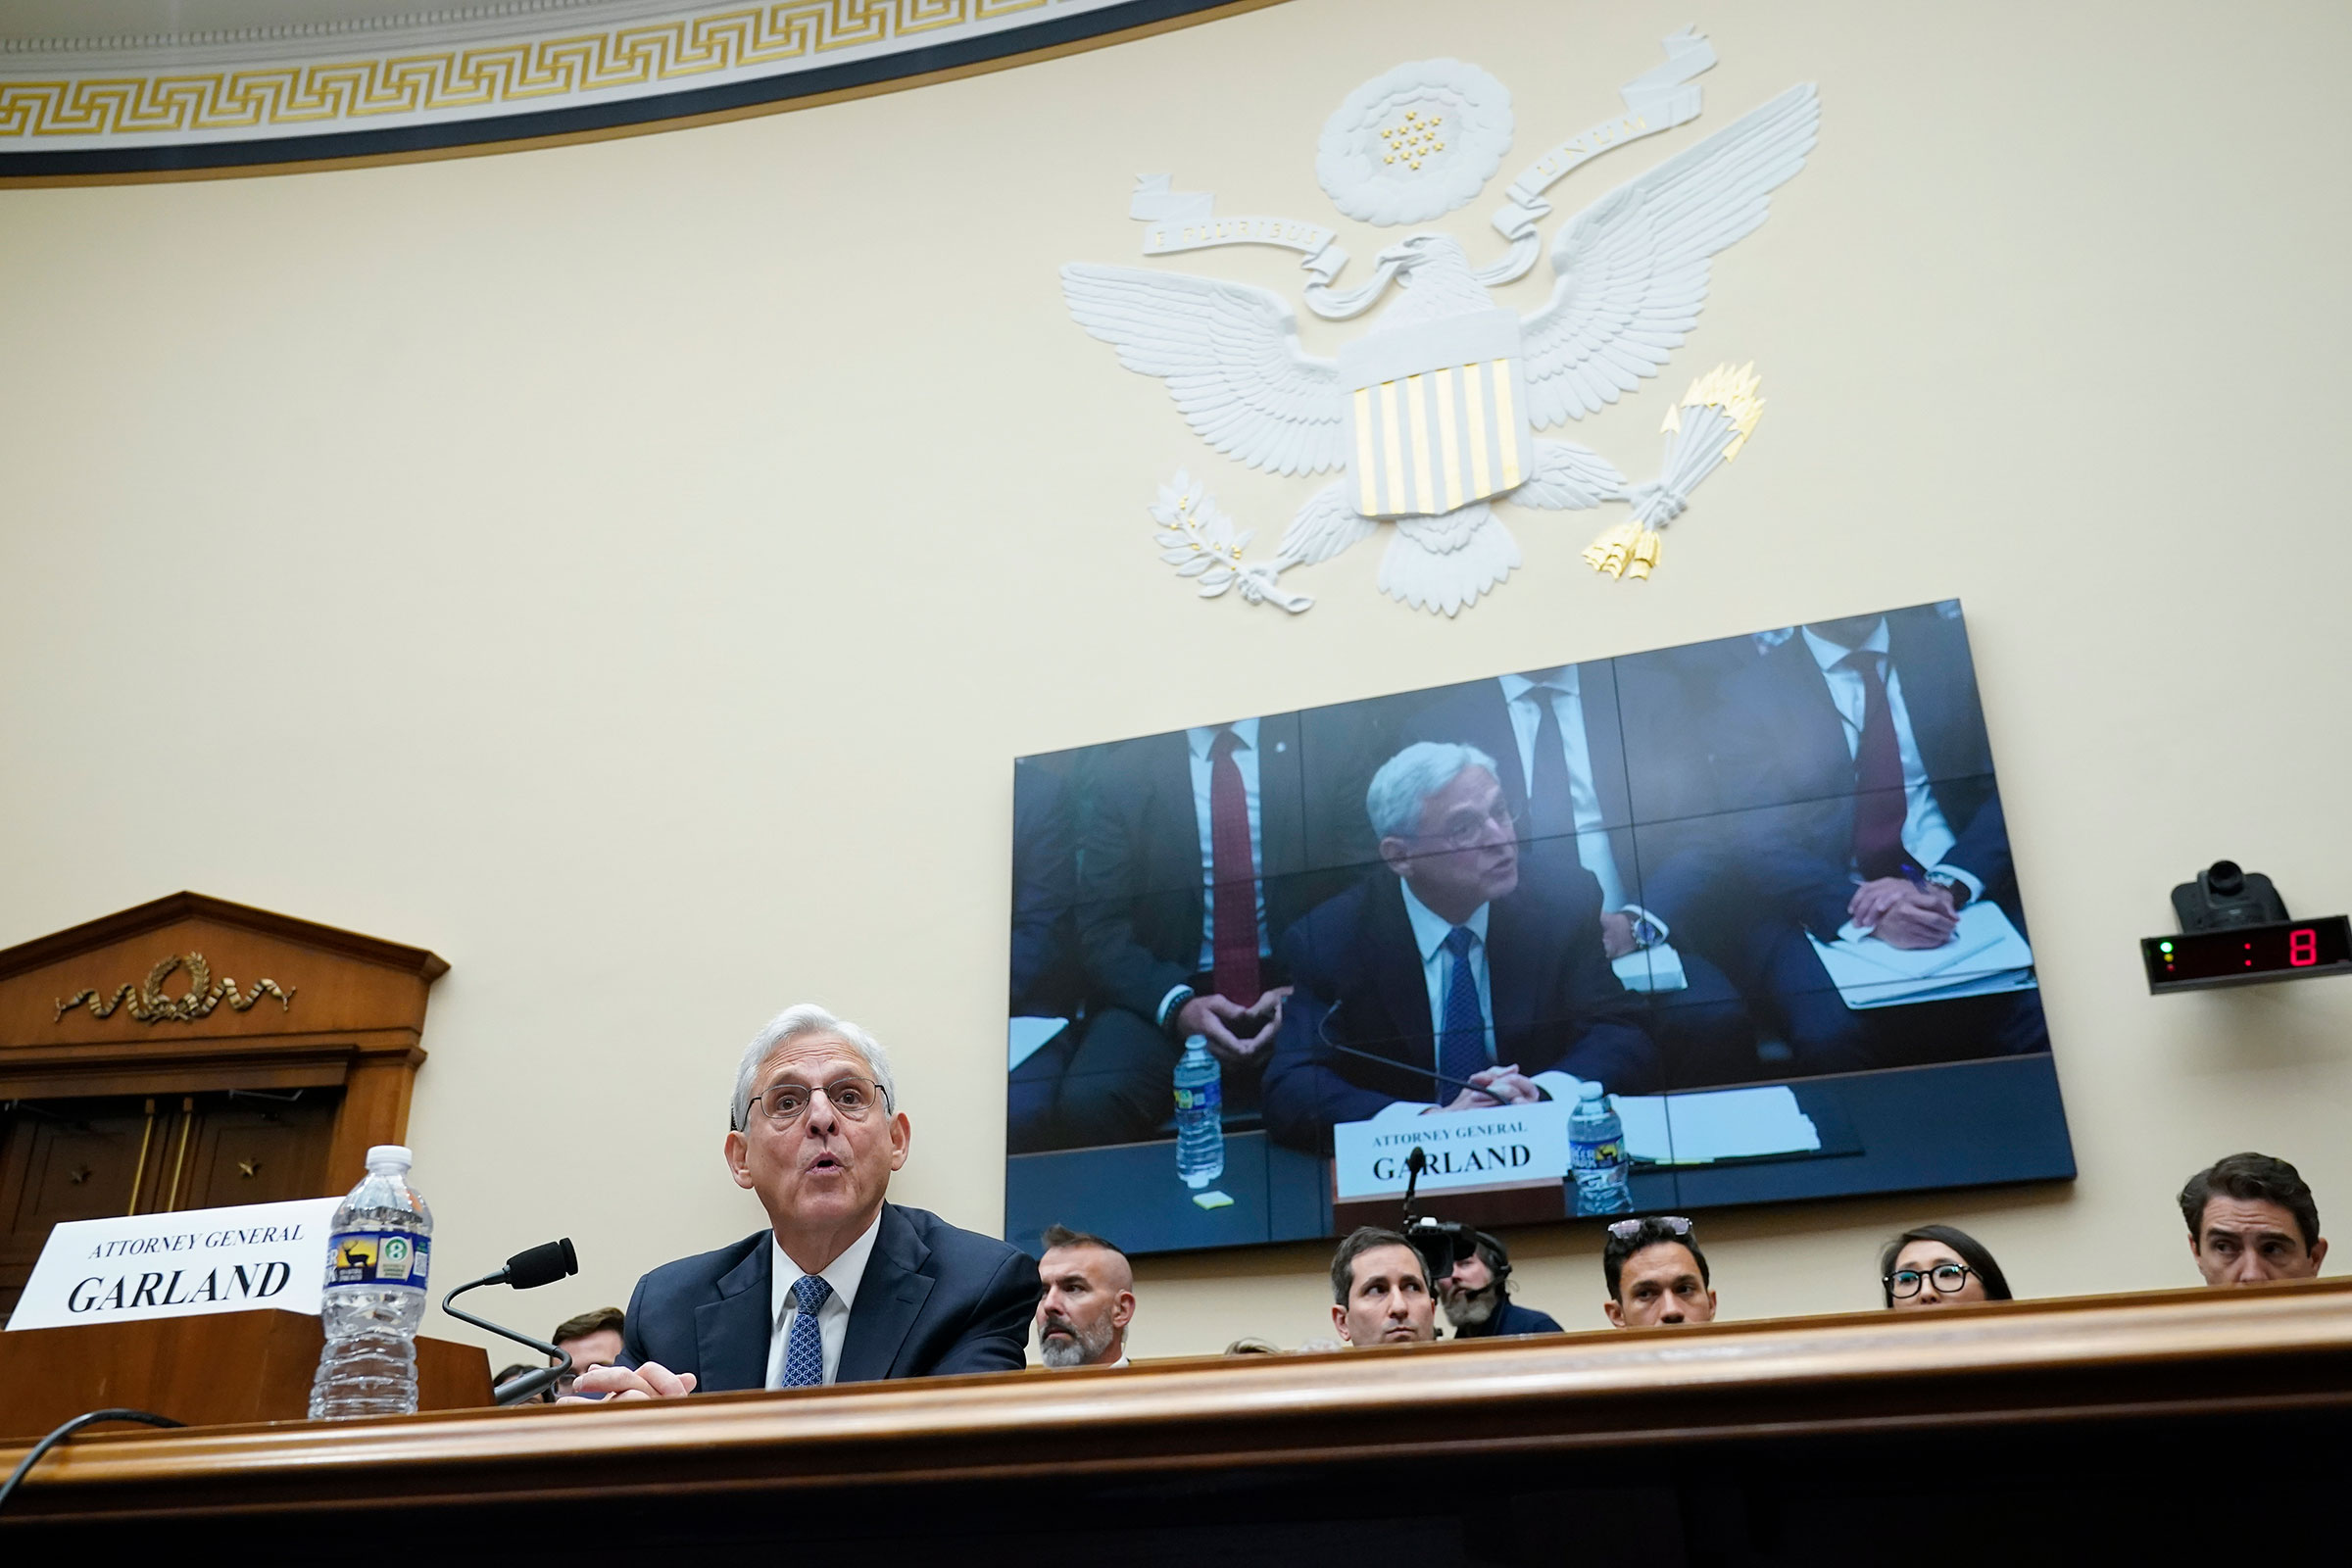 Attorney General Merrick Garland appears before a House Judiciary Committee hearing, Wednesday, Sept. 20, 2023, on Capitol Hill in Washington, DC.